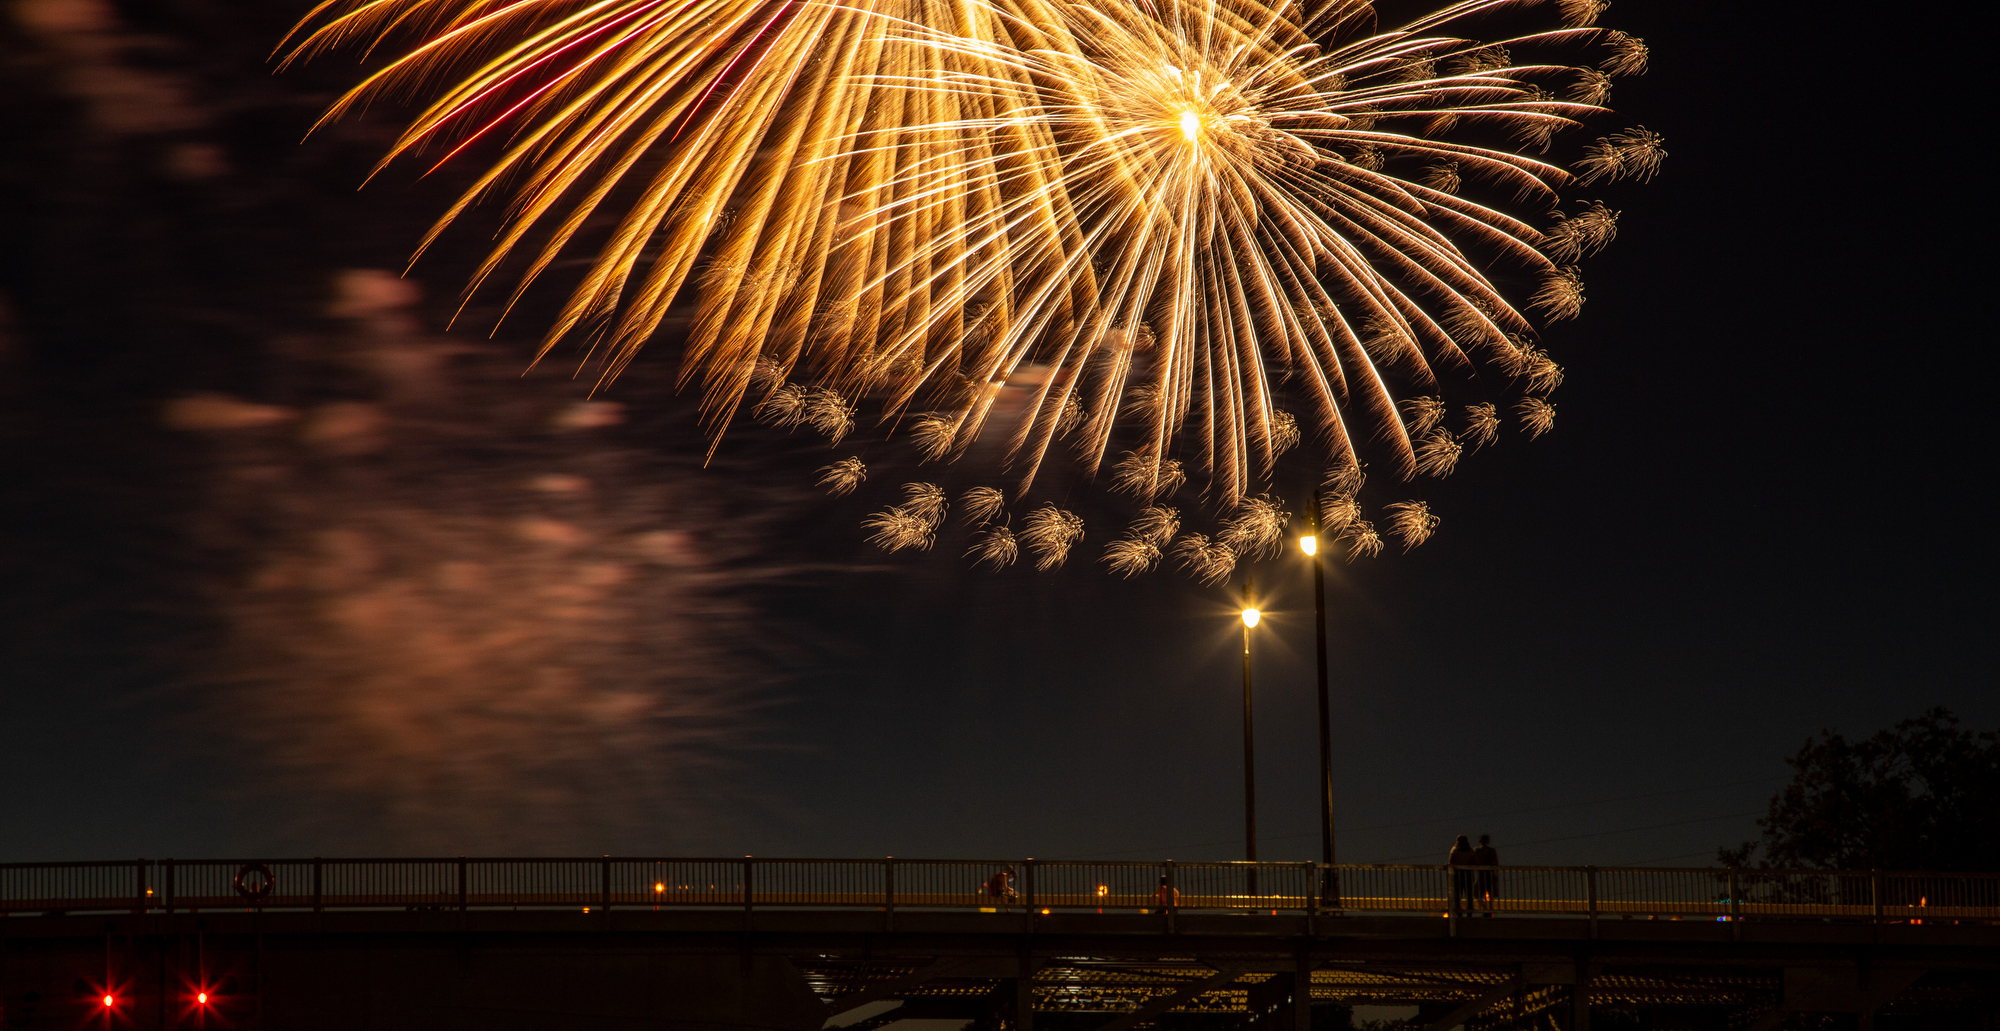 Lorain Port Authority Fireworks show on the Black River